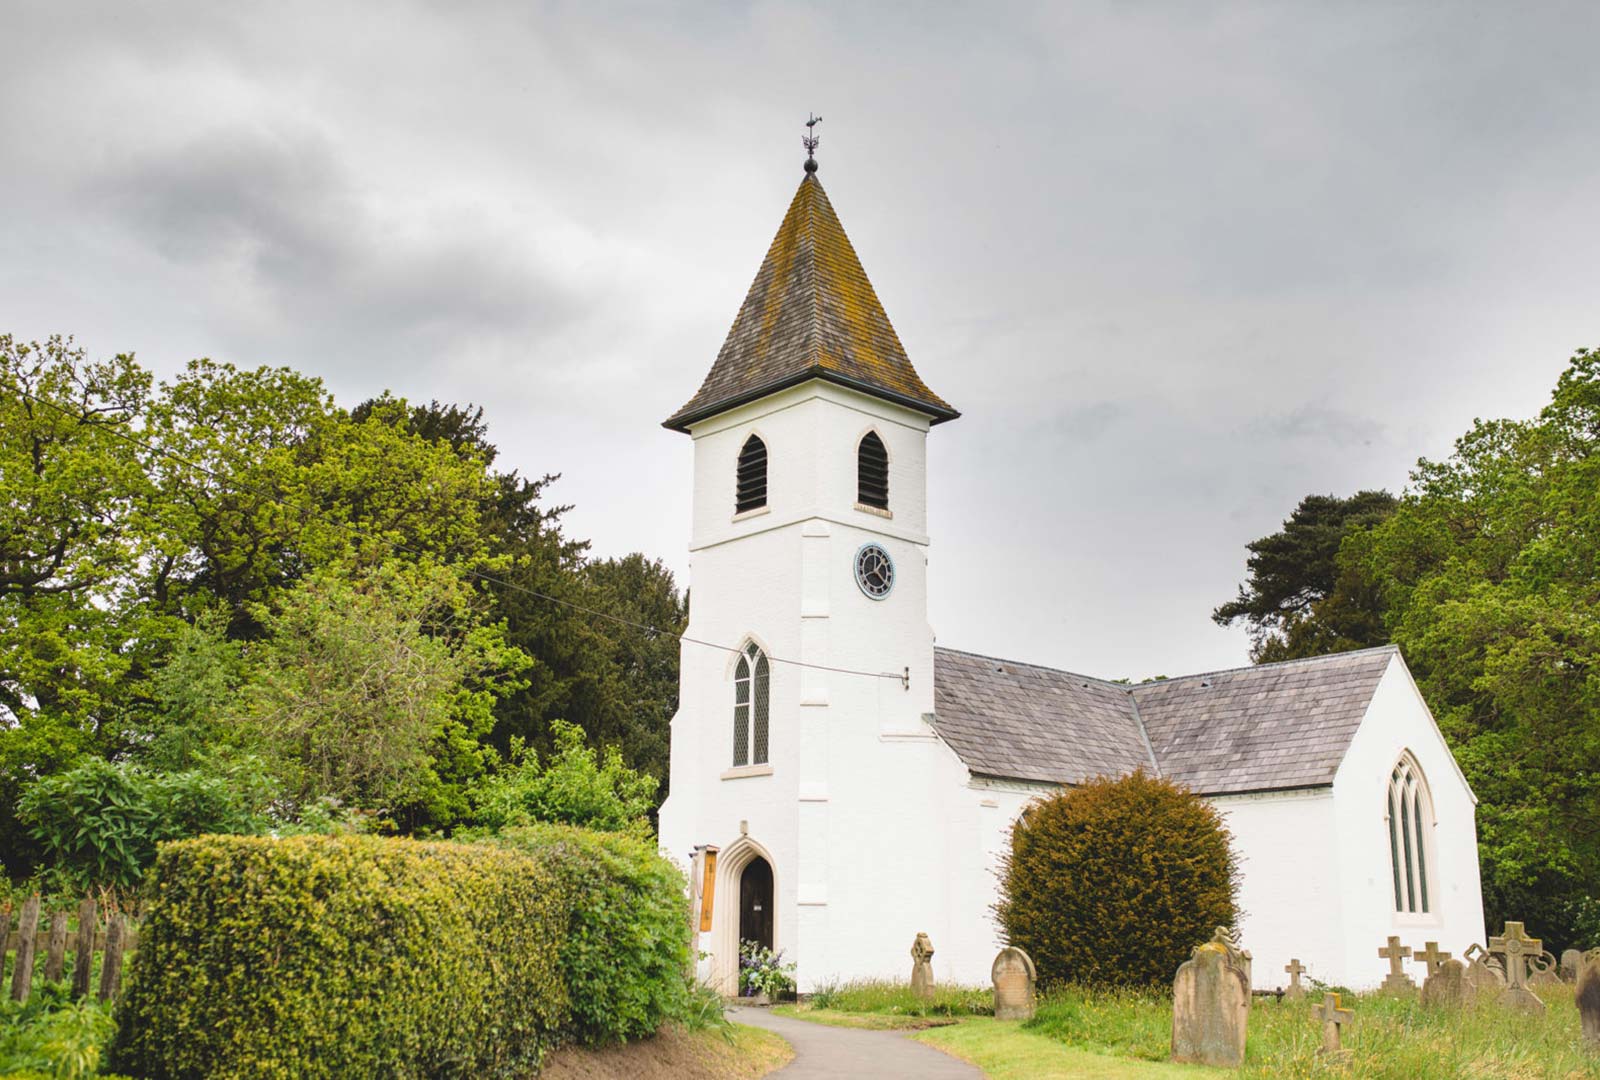 A view of a whitewashed country church set amongst topiary and a countryside environment